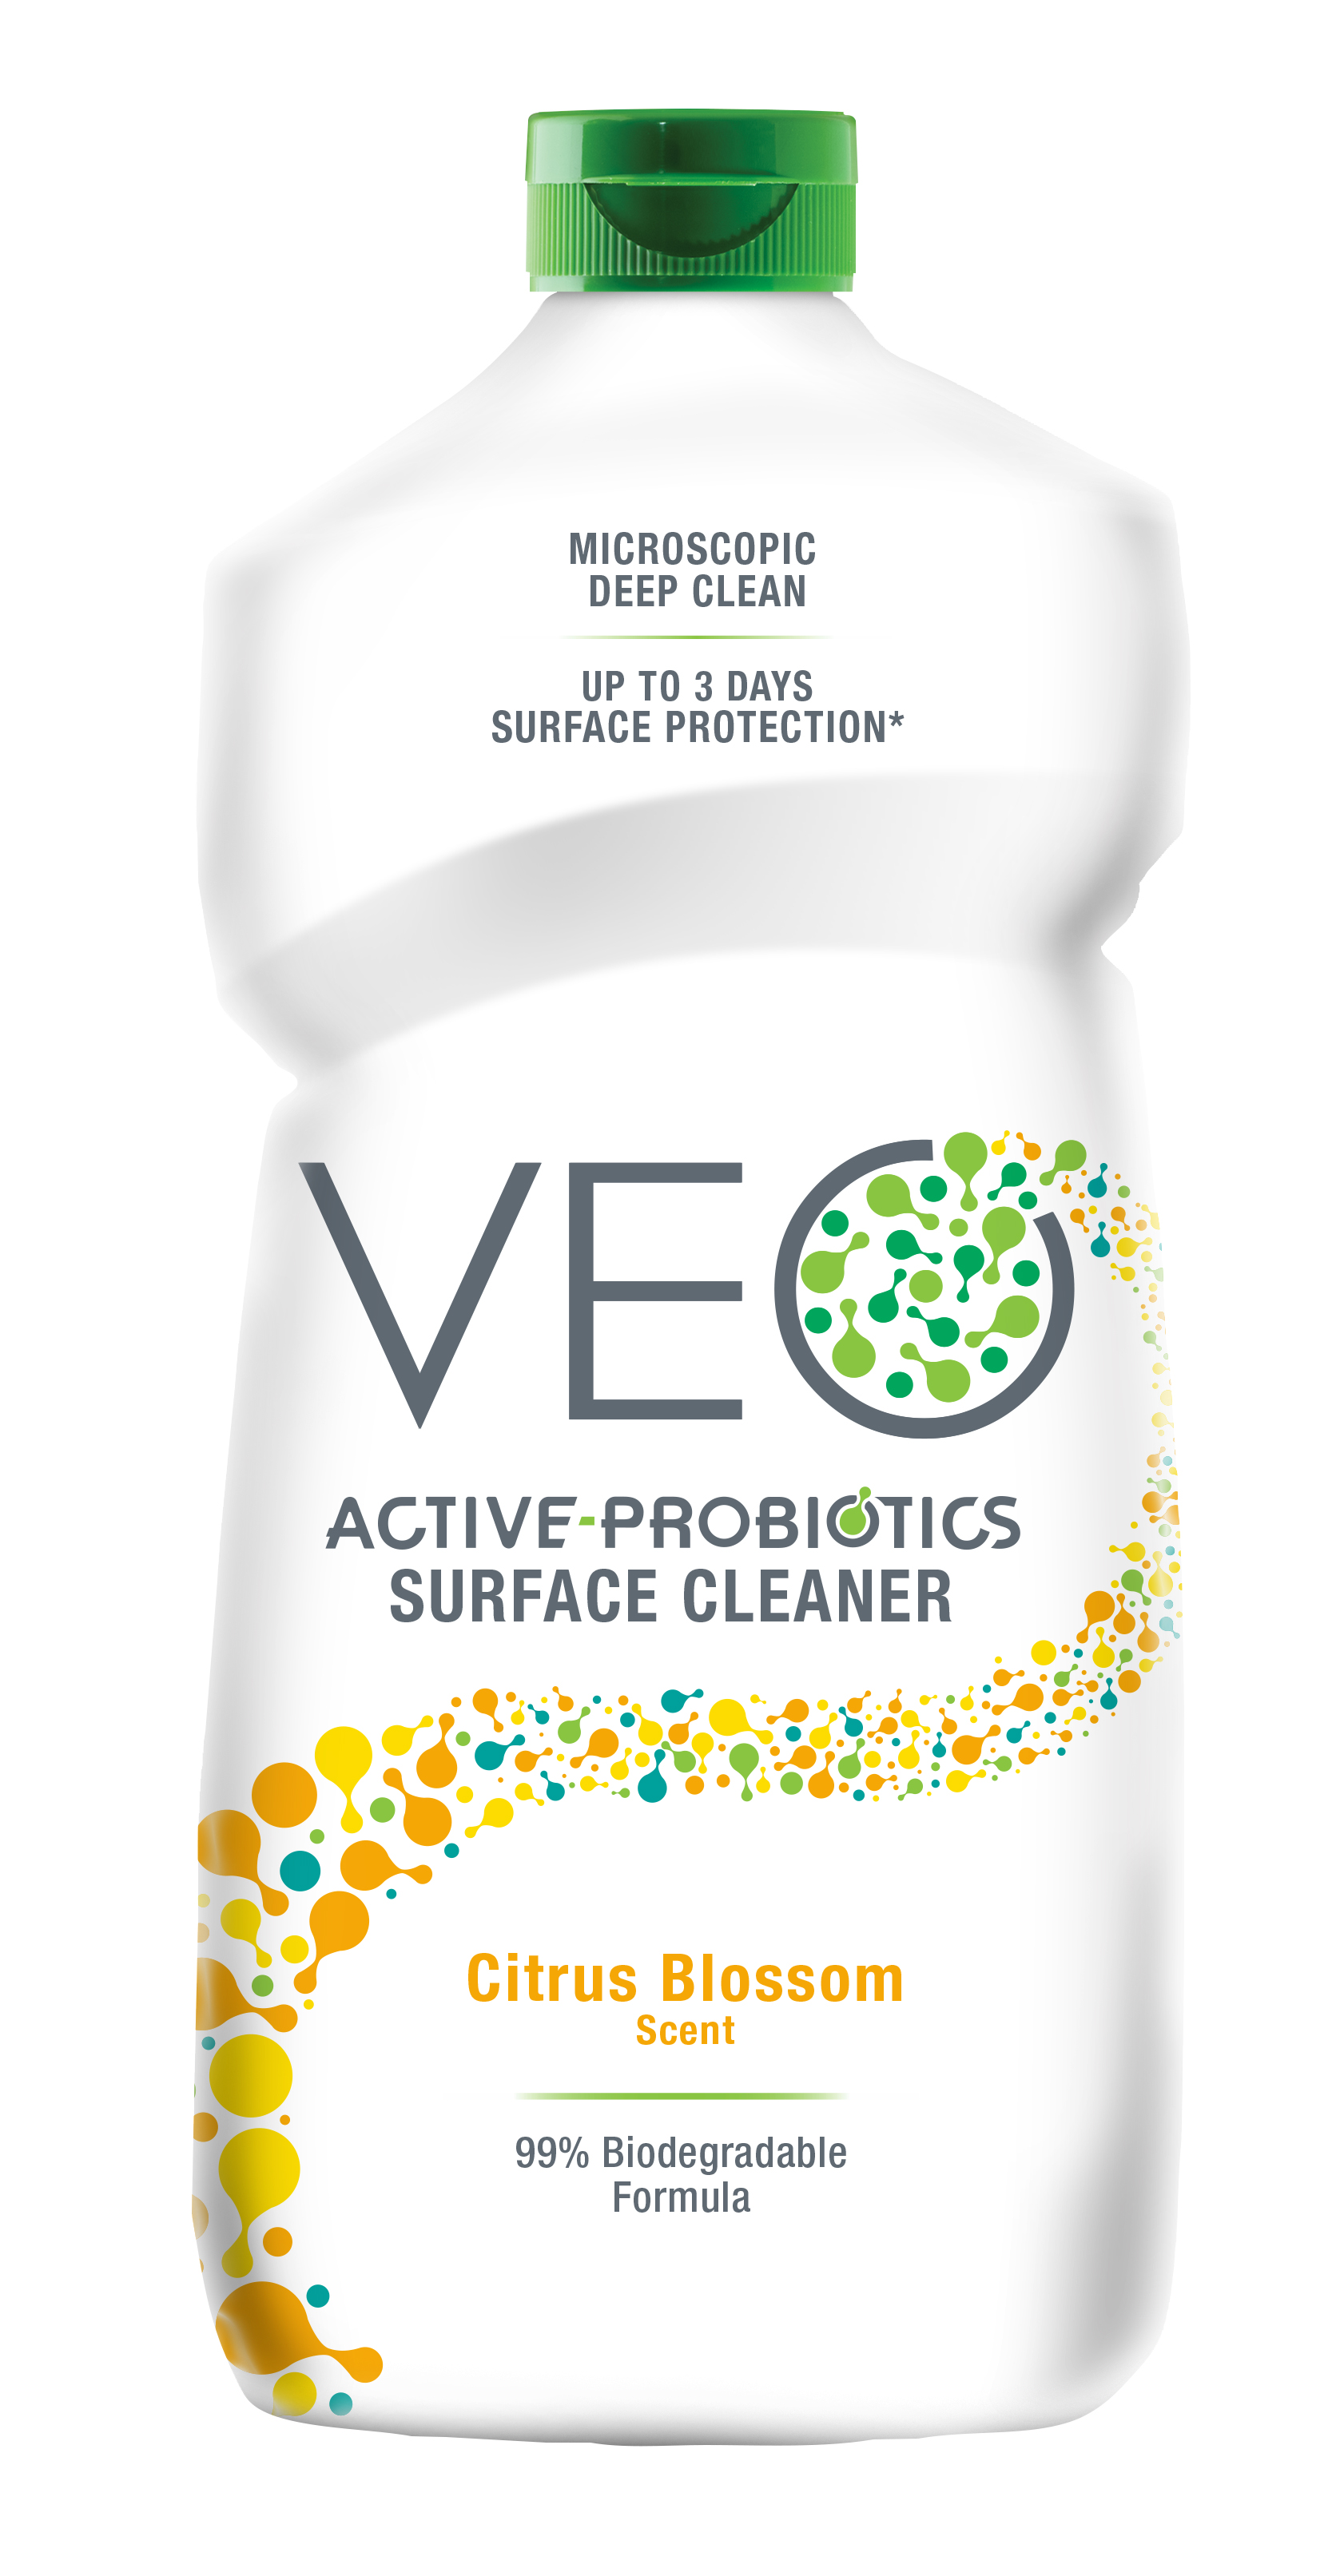 Veo Active-Probiotics Surface Cleaner - Citrus Blossom Scent (Discontinued)